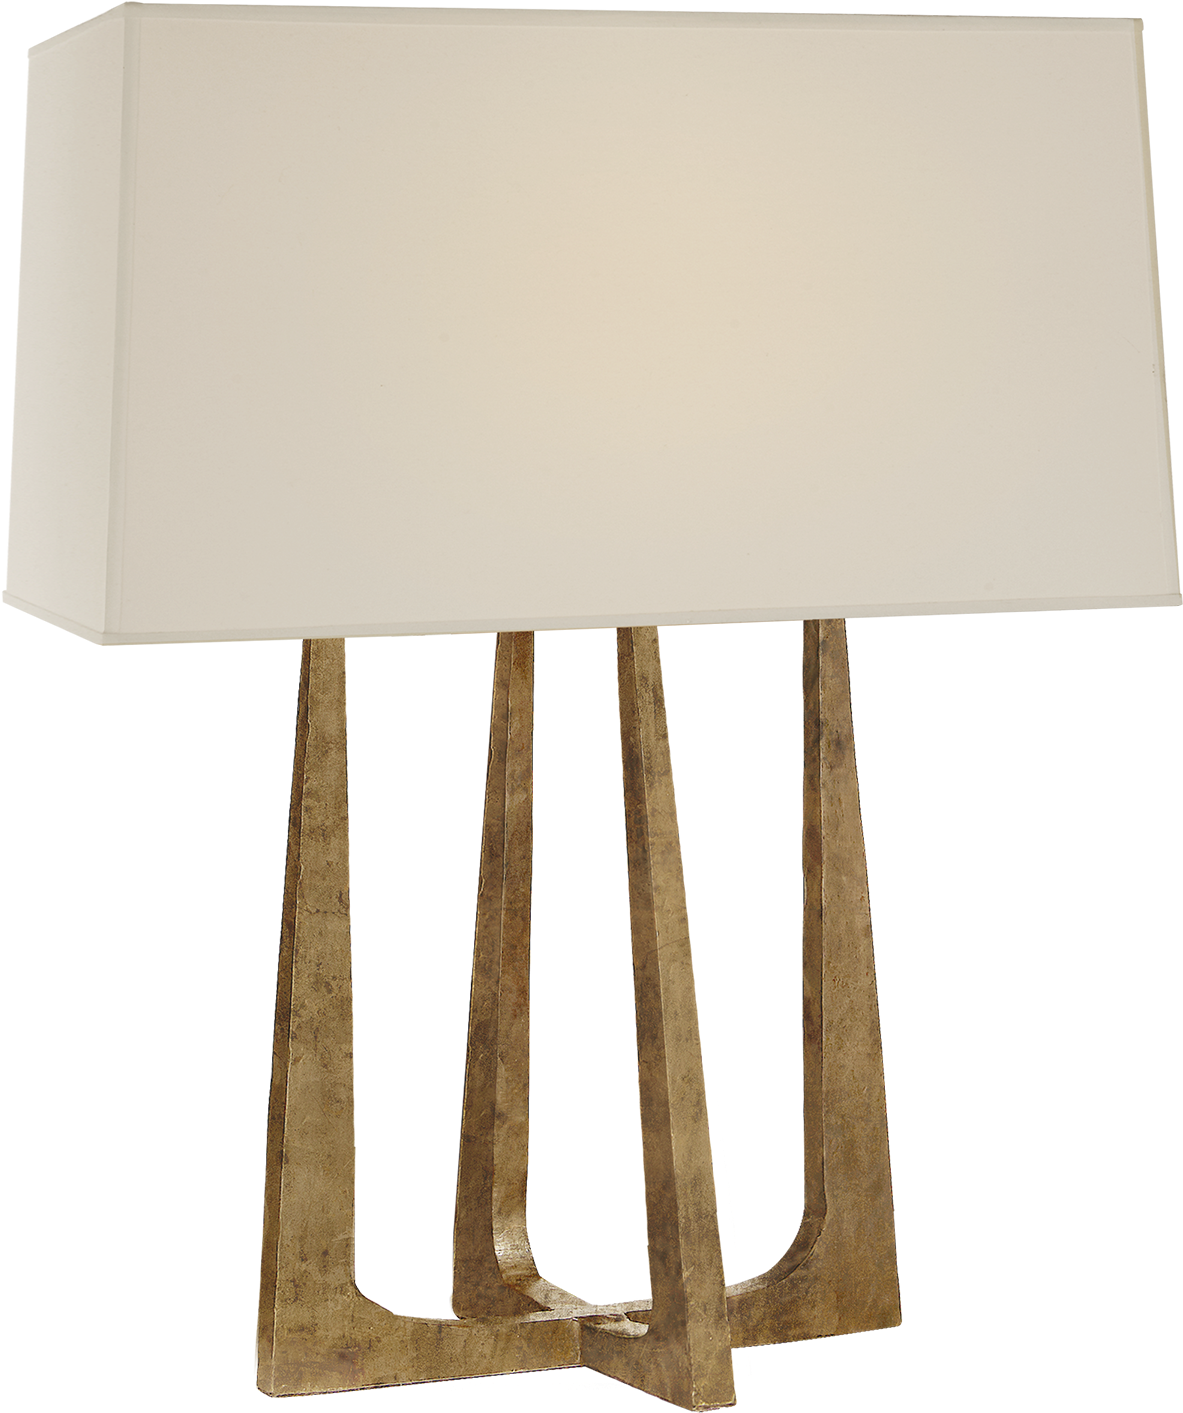 Load Image Into Gallery Viewer, Scala Hand-forged Bedside - Lampshade (1440x1440), Png Download